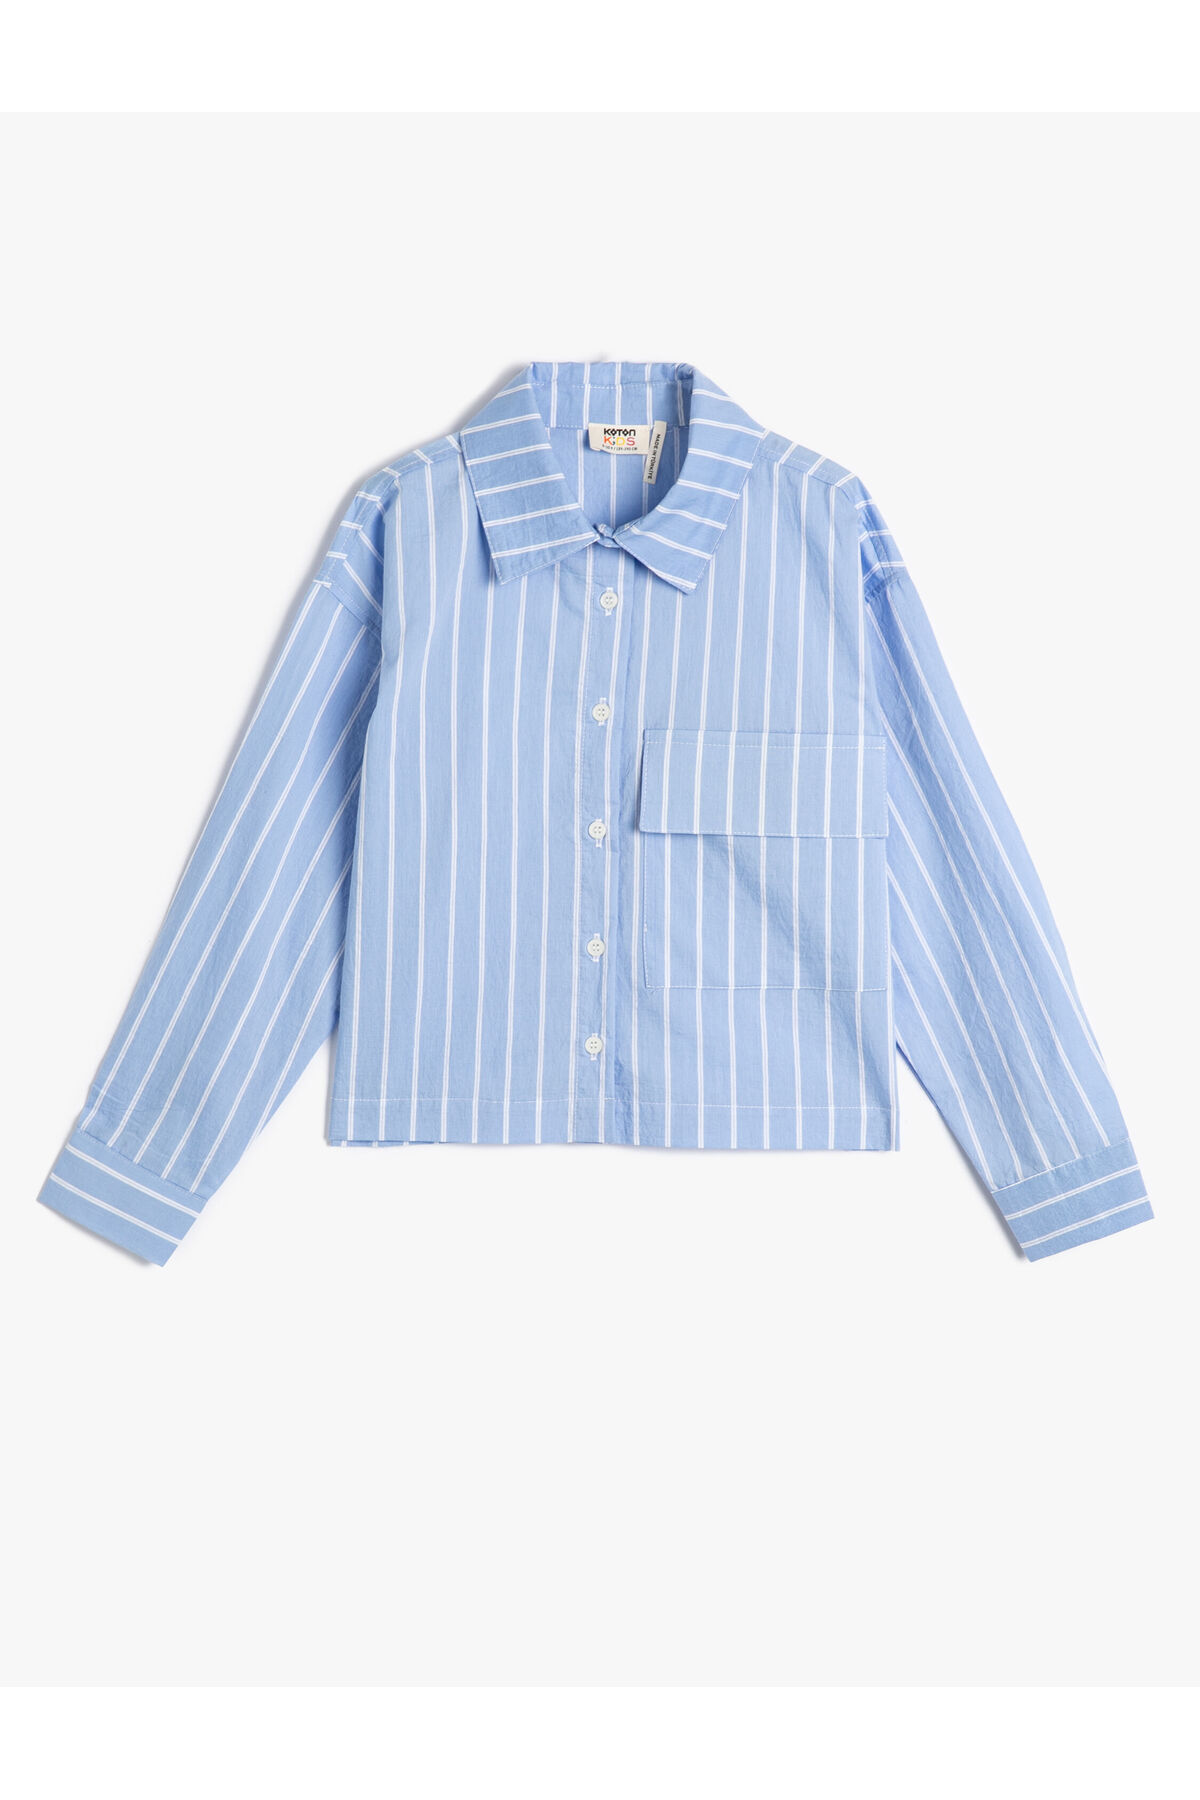 Koton Shirt Long Sleeve Buttoned with Pocket Detail